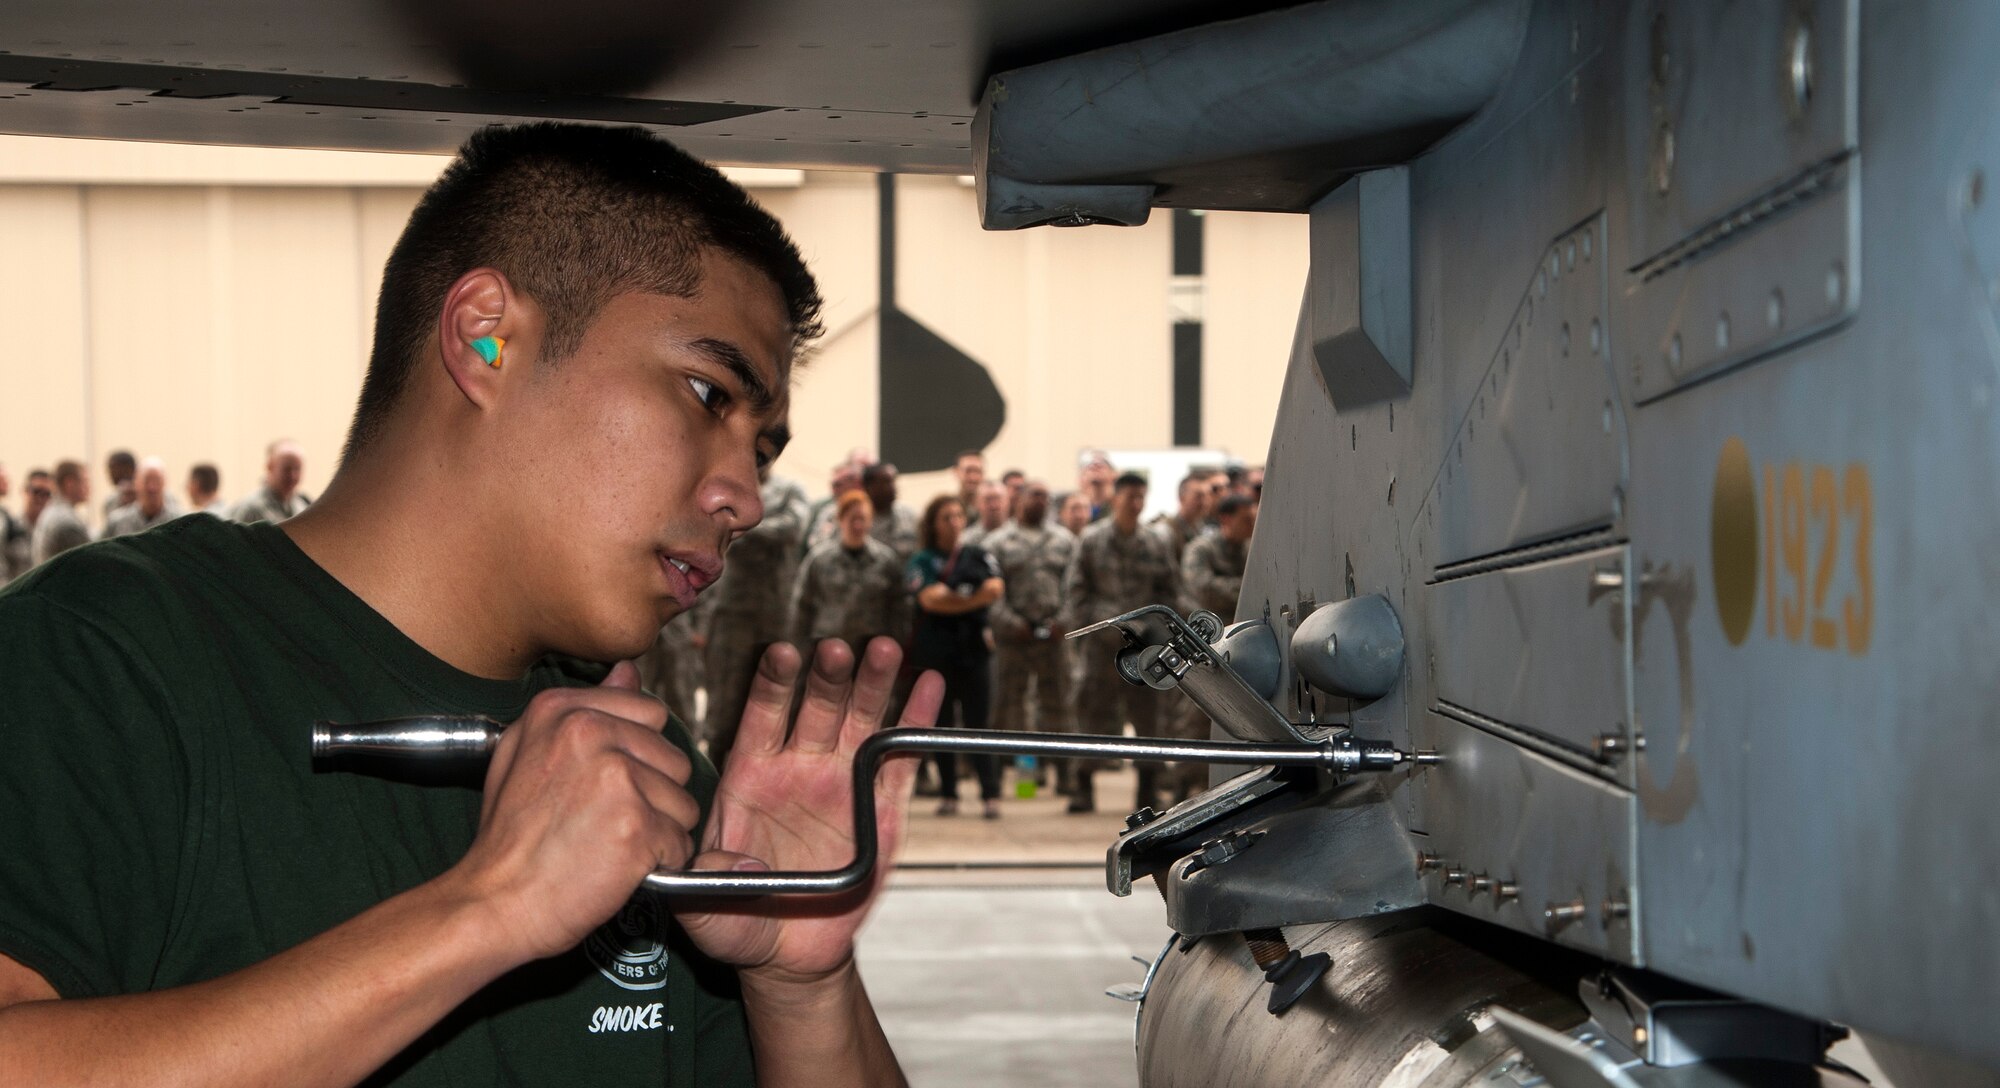 Senior Airman Jonathan White, 80th Aircraft Maintenance Unit load crew member, tightens a bolt to close a panel during a first quarter load crew of the quarter competition at Kunsan Air Base, Republic of Korea, April 8, 2016. One way the Wolf Pack shows the value of superior technical and weapons system expertise is through quarterly weapons load competitions, which help ensure Airmen remain proficient at their jobs. The 8th MXS won the quarterly competition for the third time in a row, which is a first by the same group of Airmen at the Wolf Pack. (U.S. Air Force photo by Staff Sgt. Nick Wilson/Released)